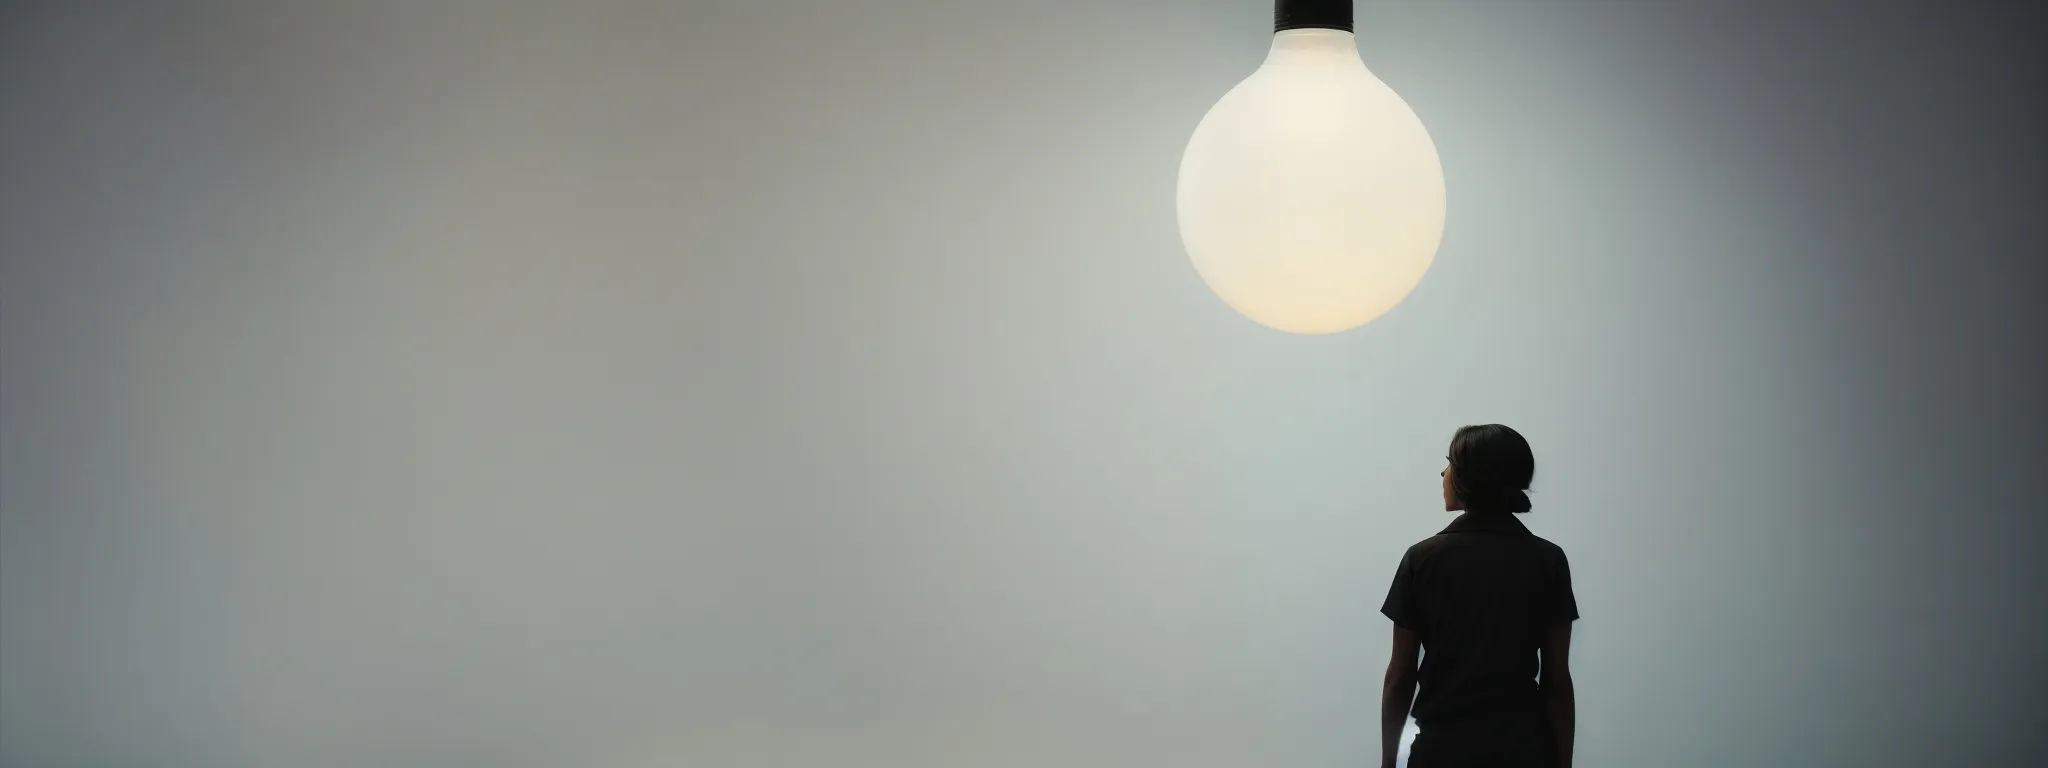 a person's silhouette stands before a giant light bulb, symbolizing a moment of creative inspiration within a digital interface.